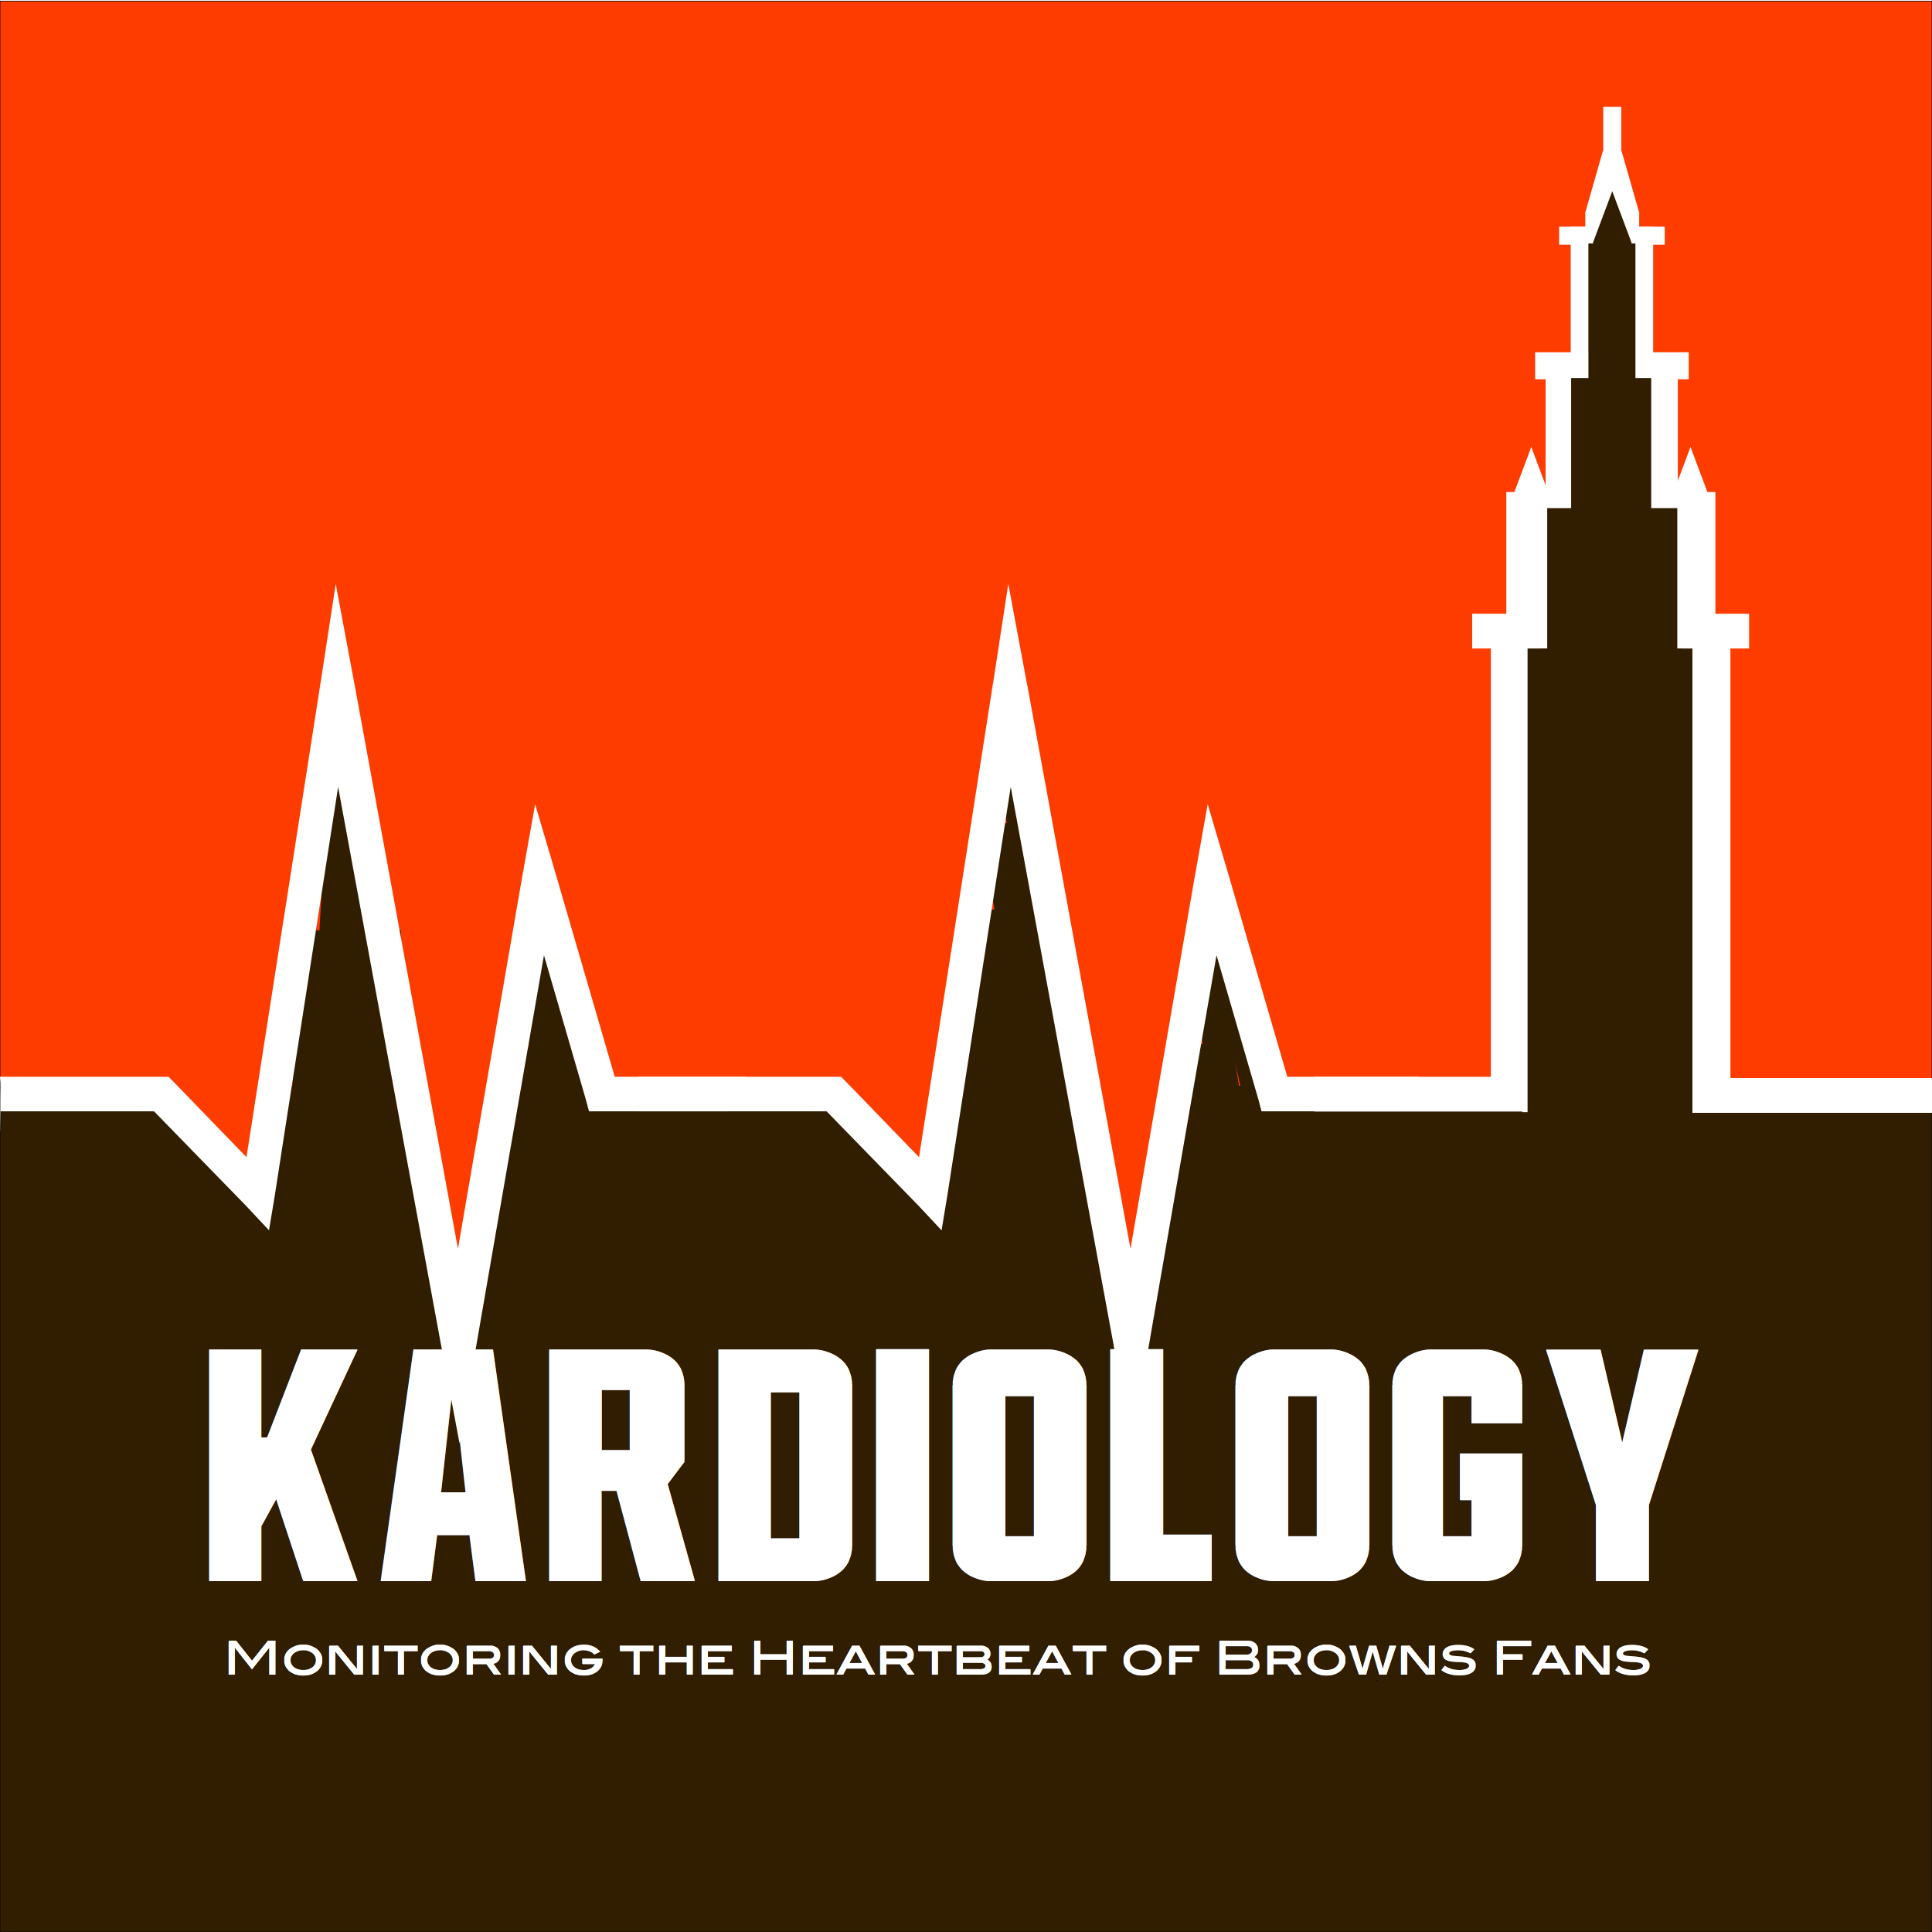 COMING SOON - The Kardiology Podcast Image